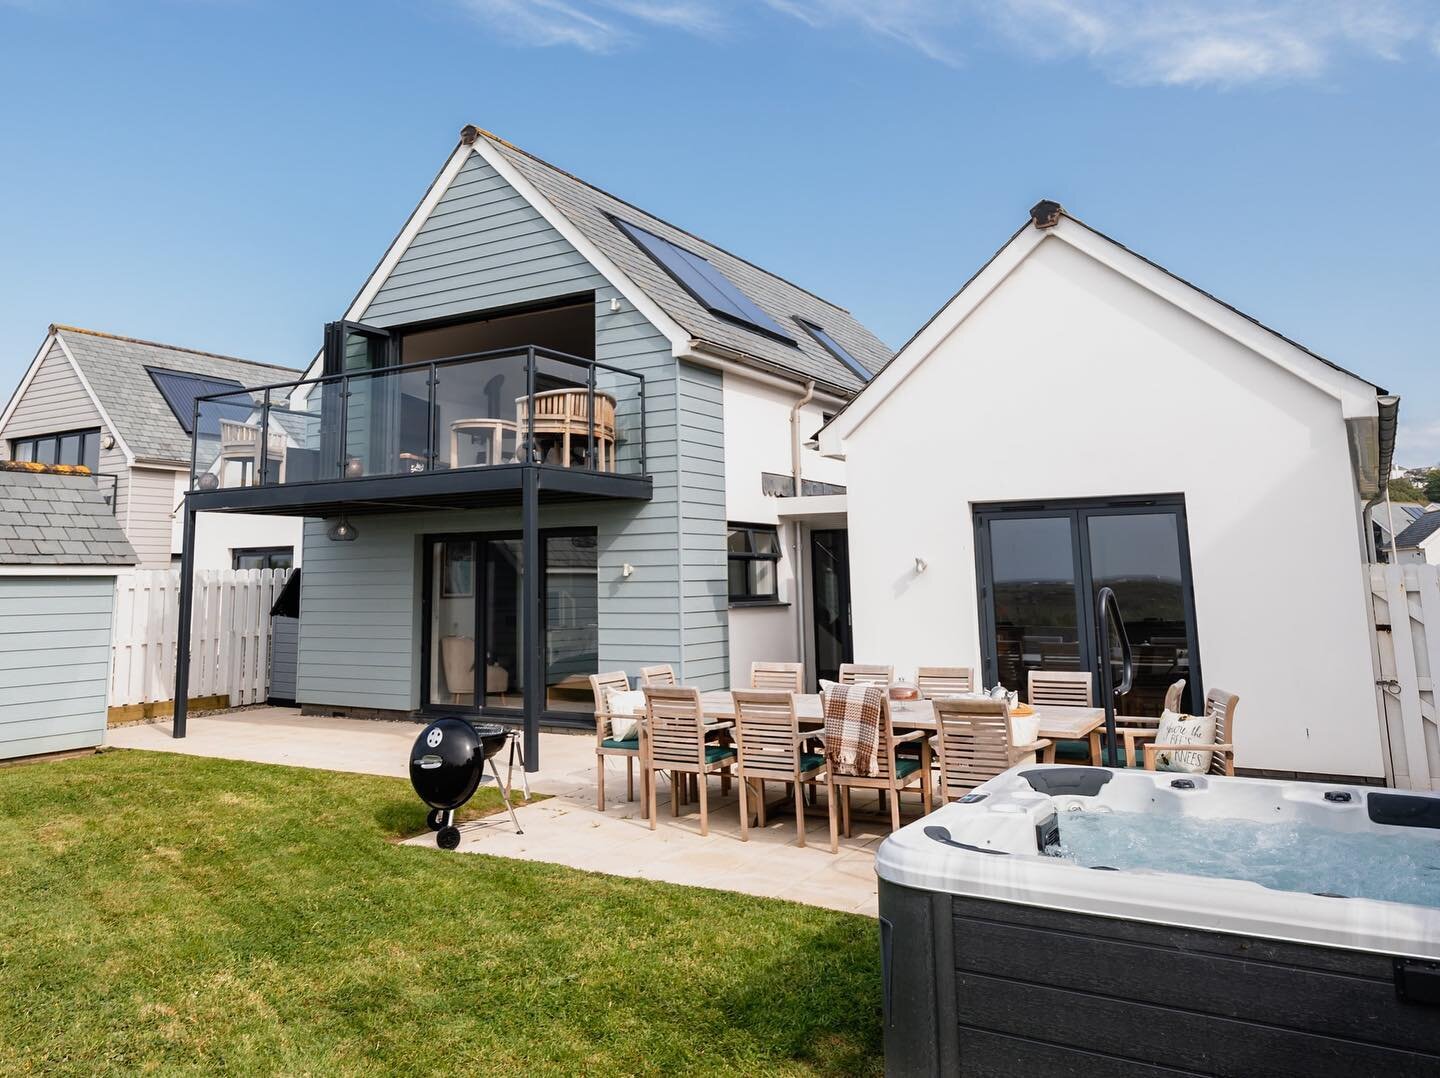 🏡 North Devon Coast Staycation 🏖️

Are you looking for a stunning coastal staycation this summer? Then look no further than Nolands Ho!

Our beautiful holiday home is situated on the edge of Westward Ho!, North Devon, overlooking Northam Burrows Co